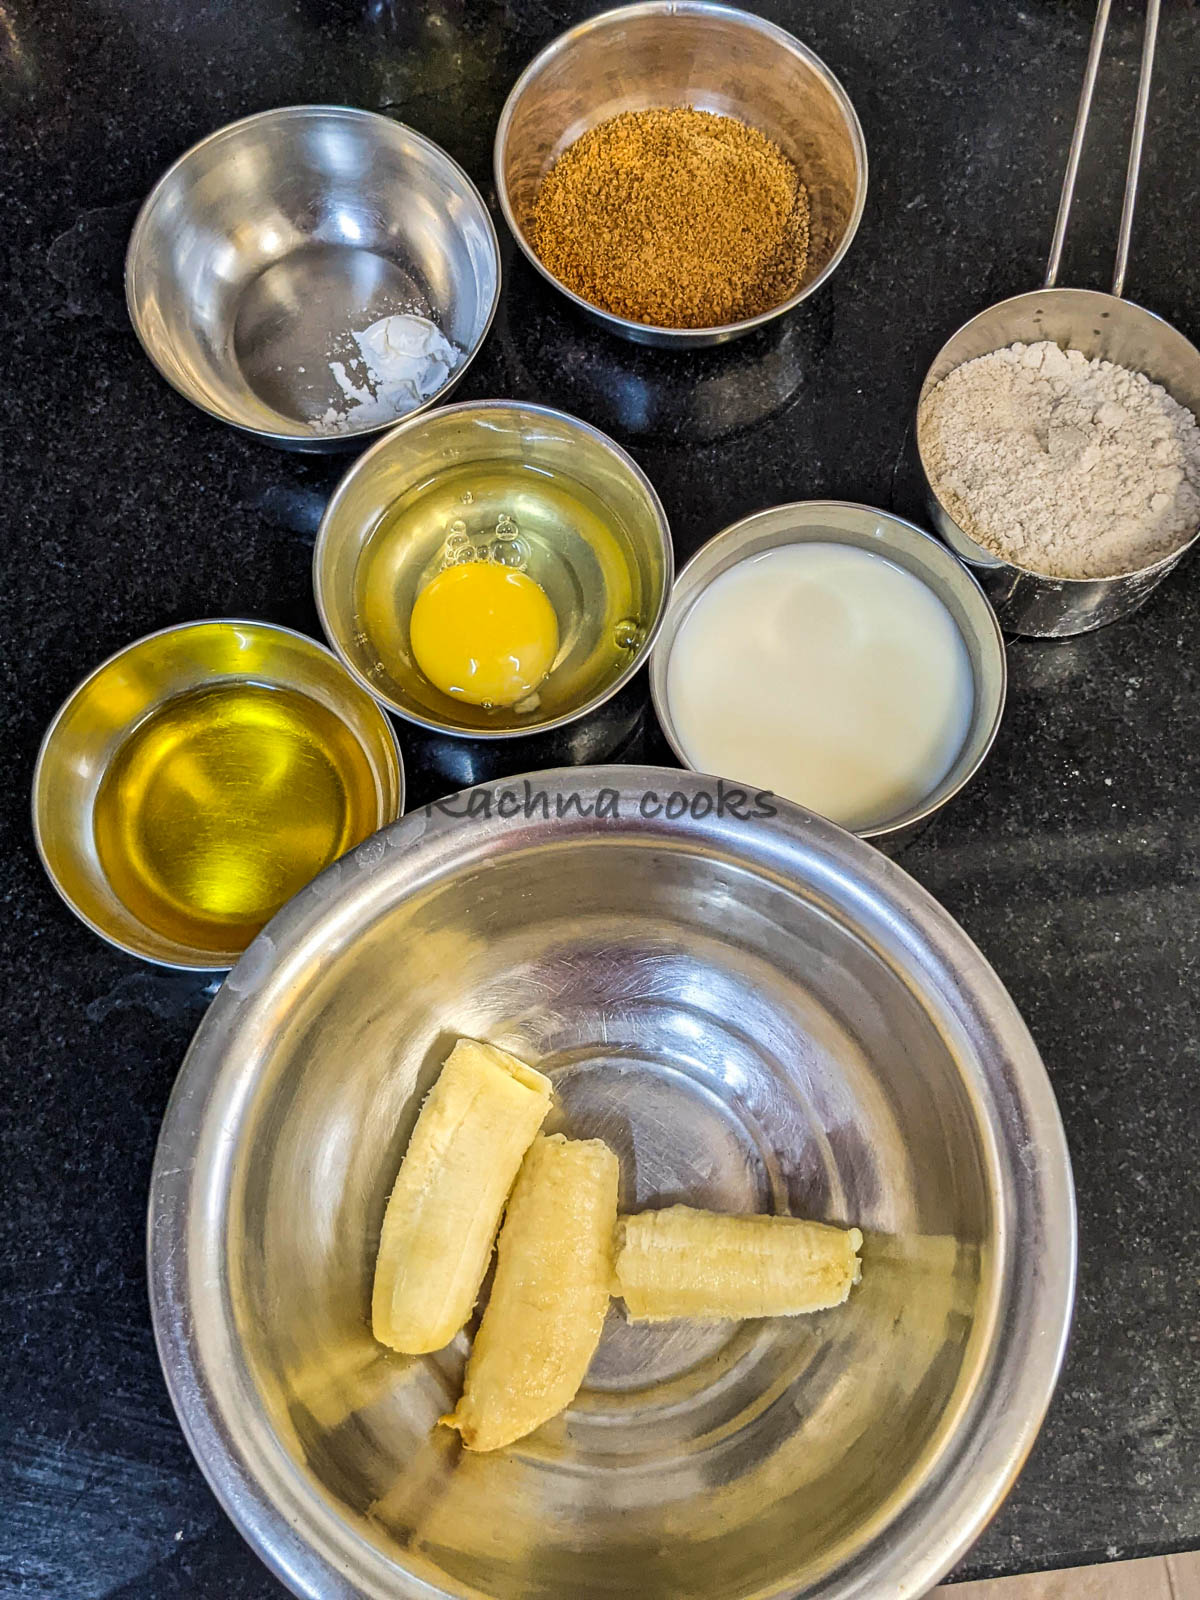 Ingredients to make banana bread are kept in bowls.